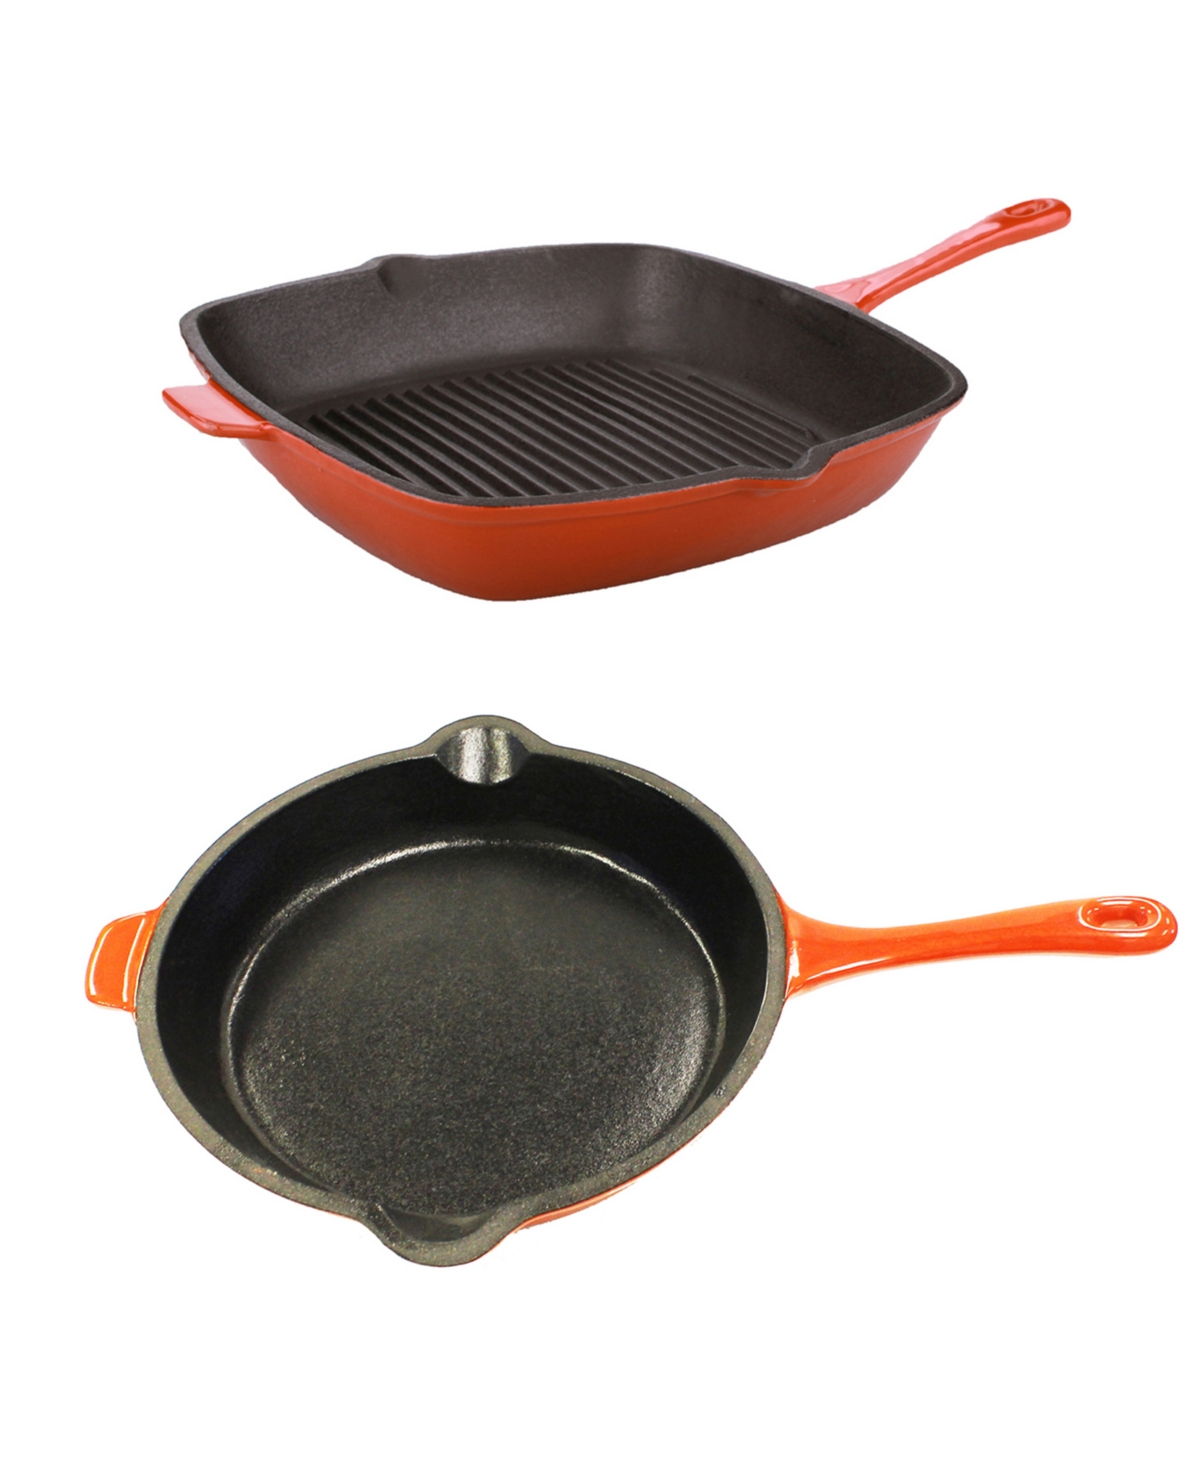 BergHOFF Neo Collection Cast Iron 2-Pc. Cookware Set